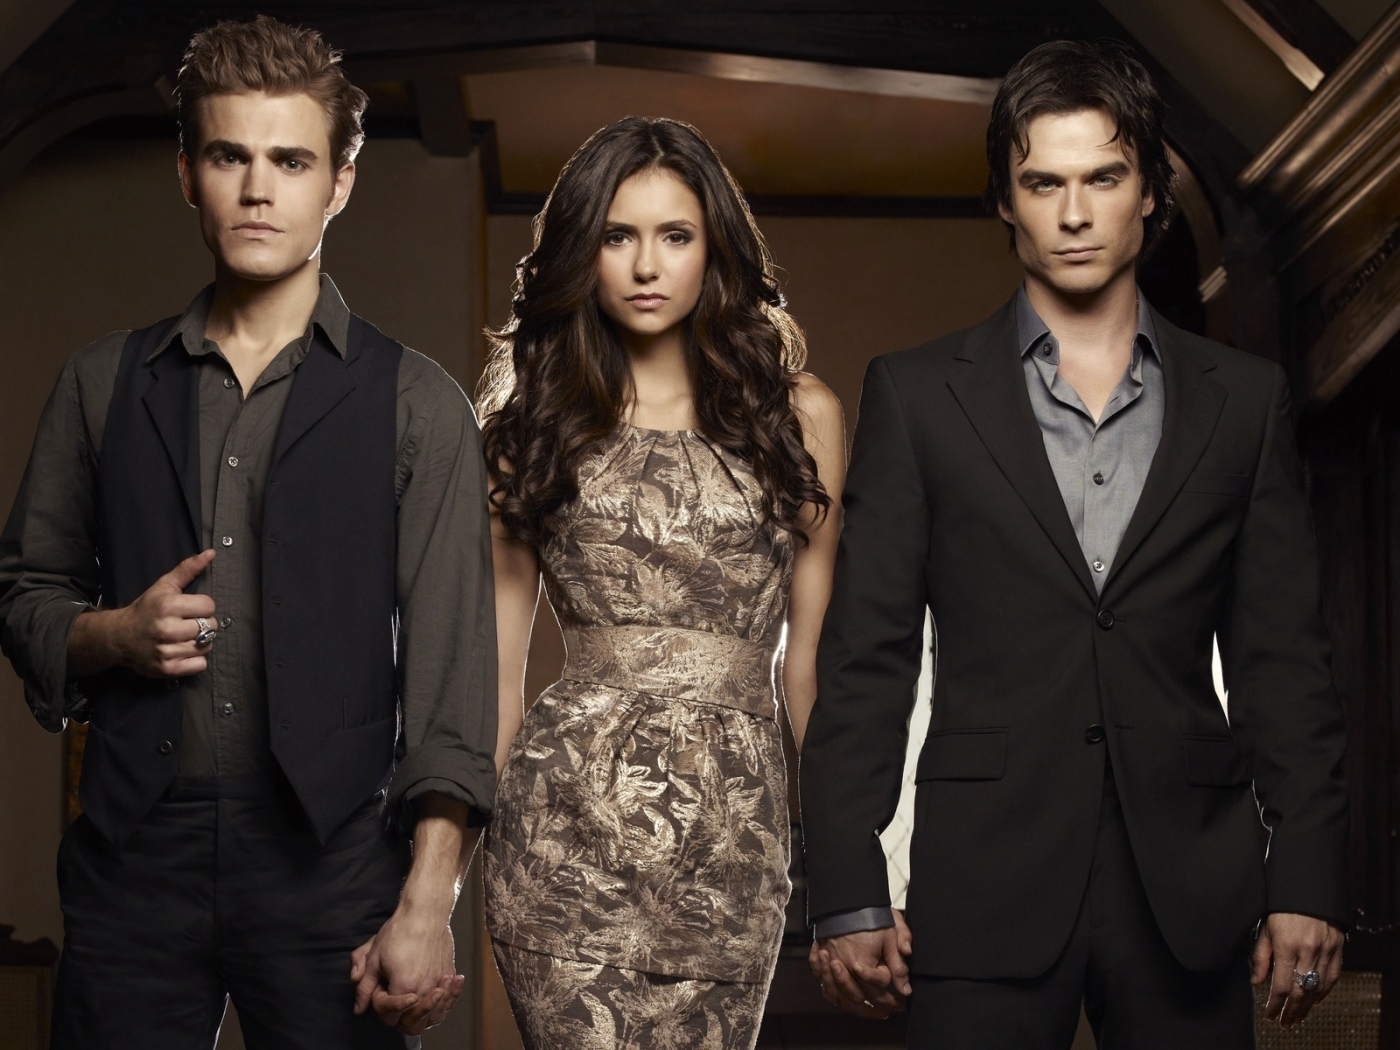 49139 download wallpaper people, cinema, vampire diaries, orange screensavers and pictures for free